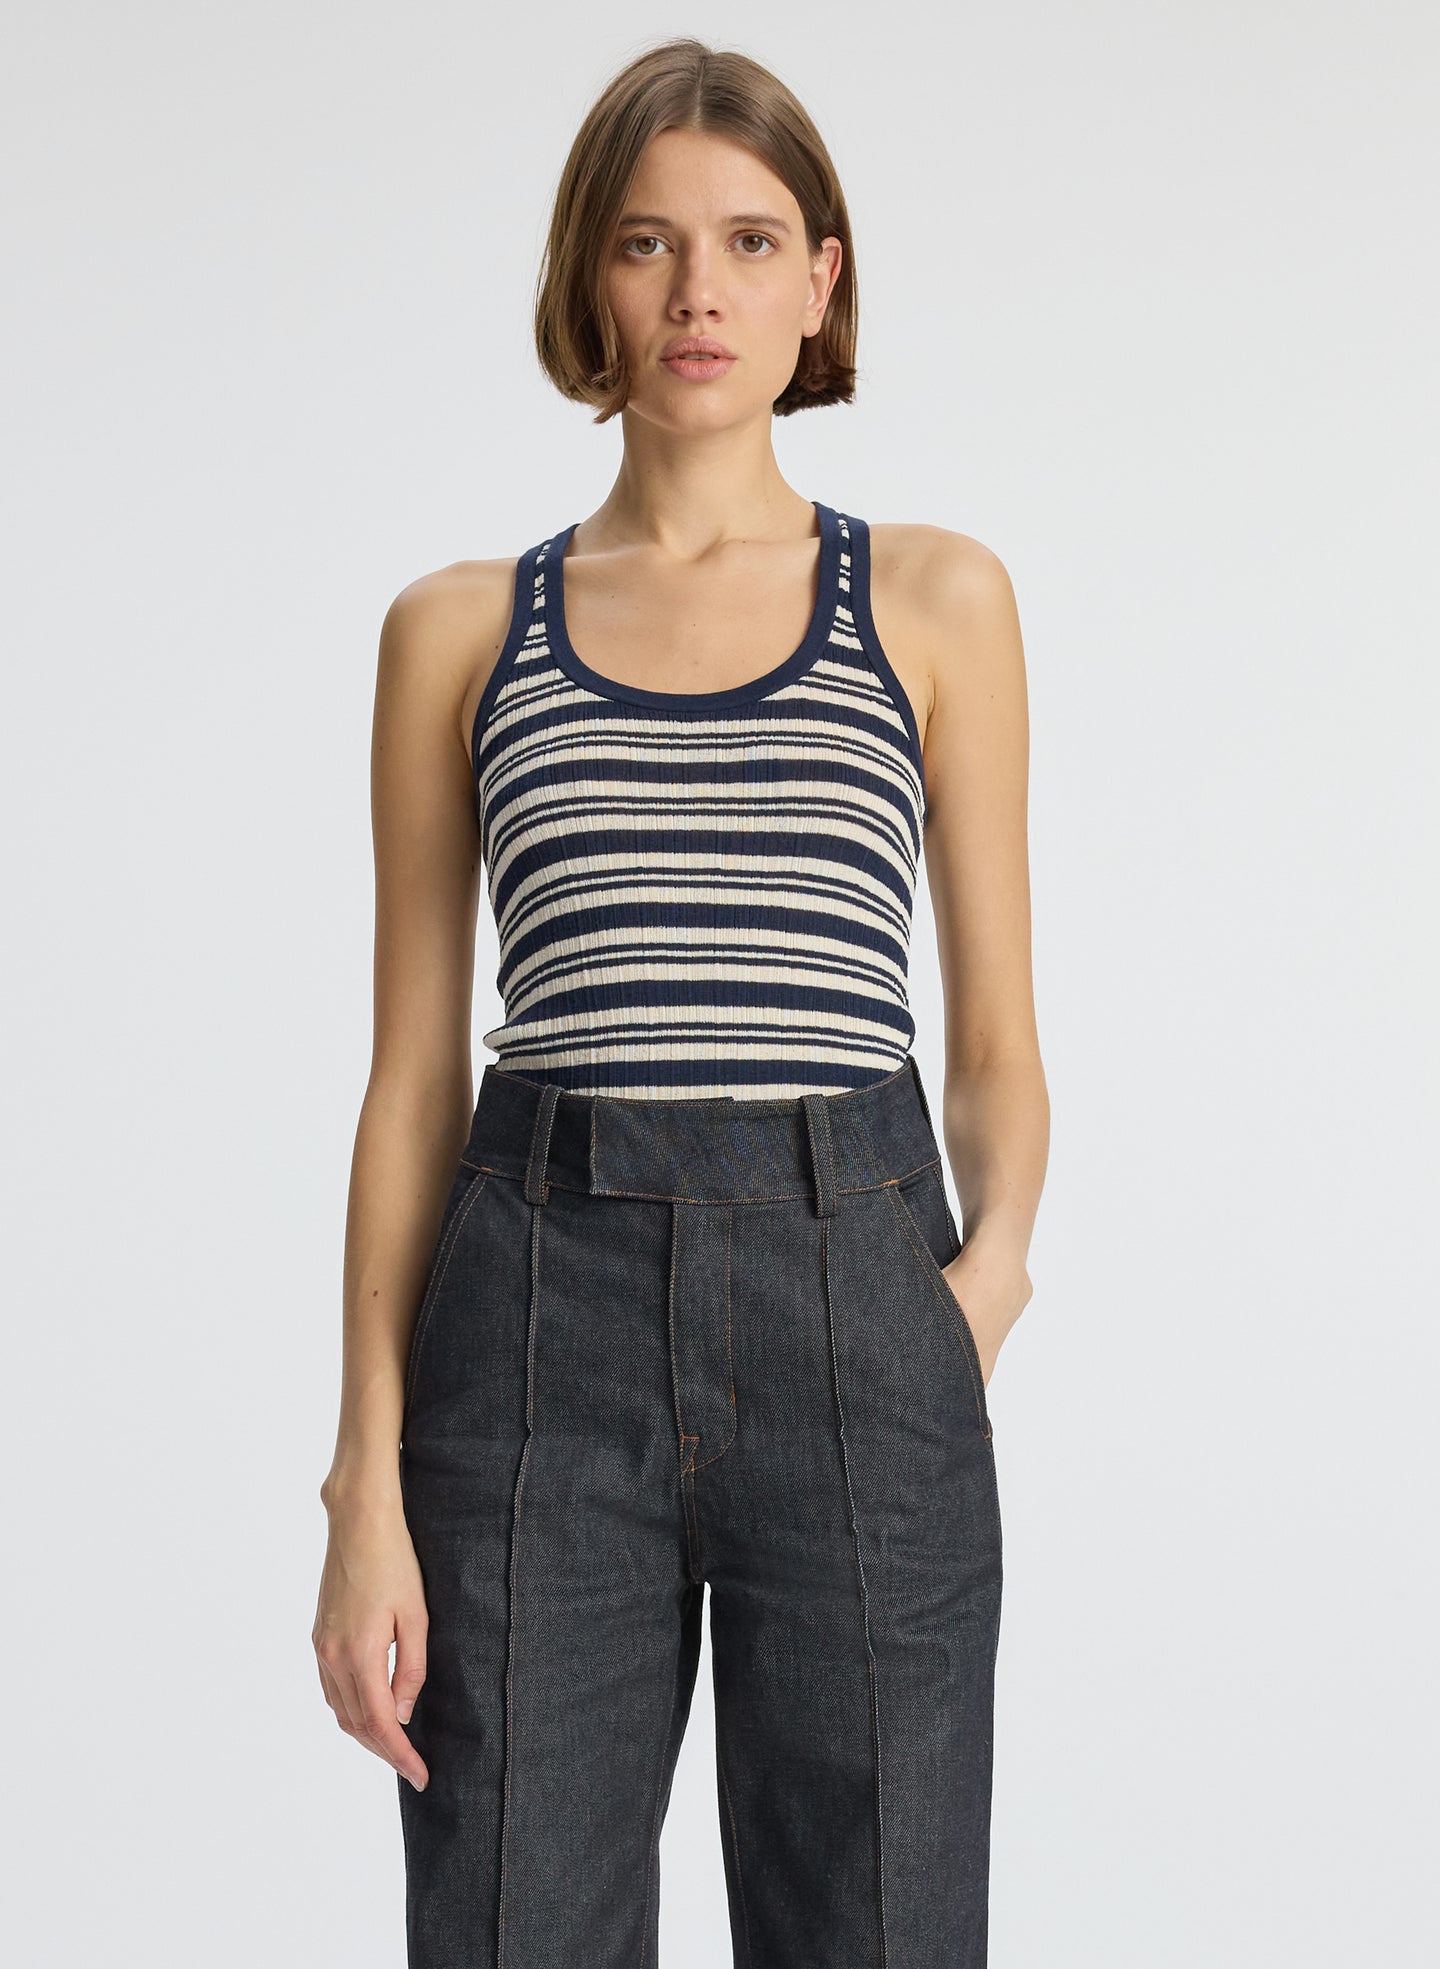 front view of woman wearing navy blue striped tank top and dark wash raw denim jeans